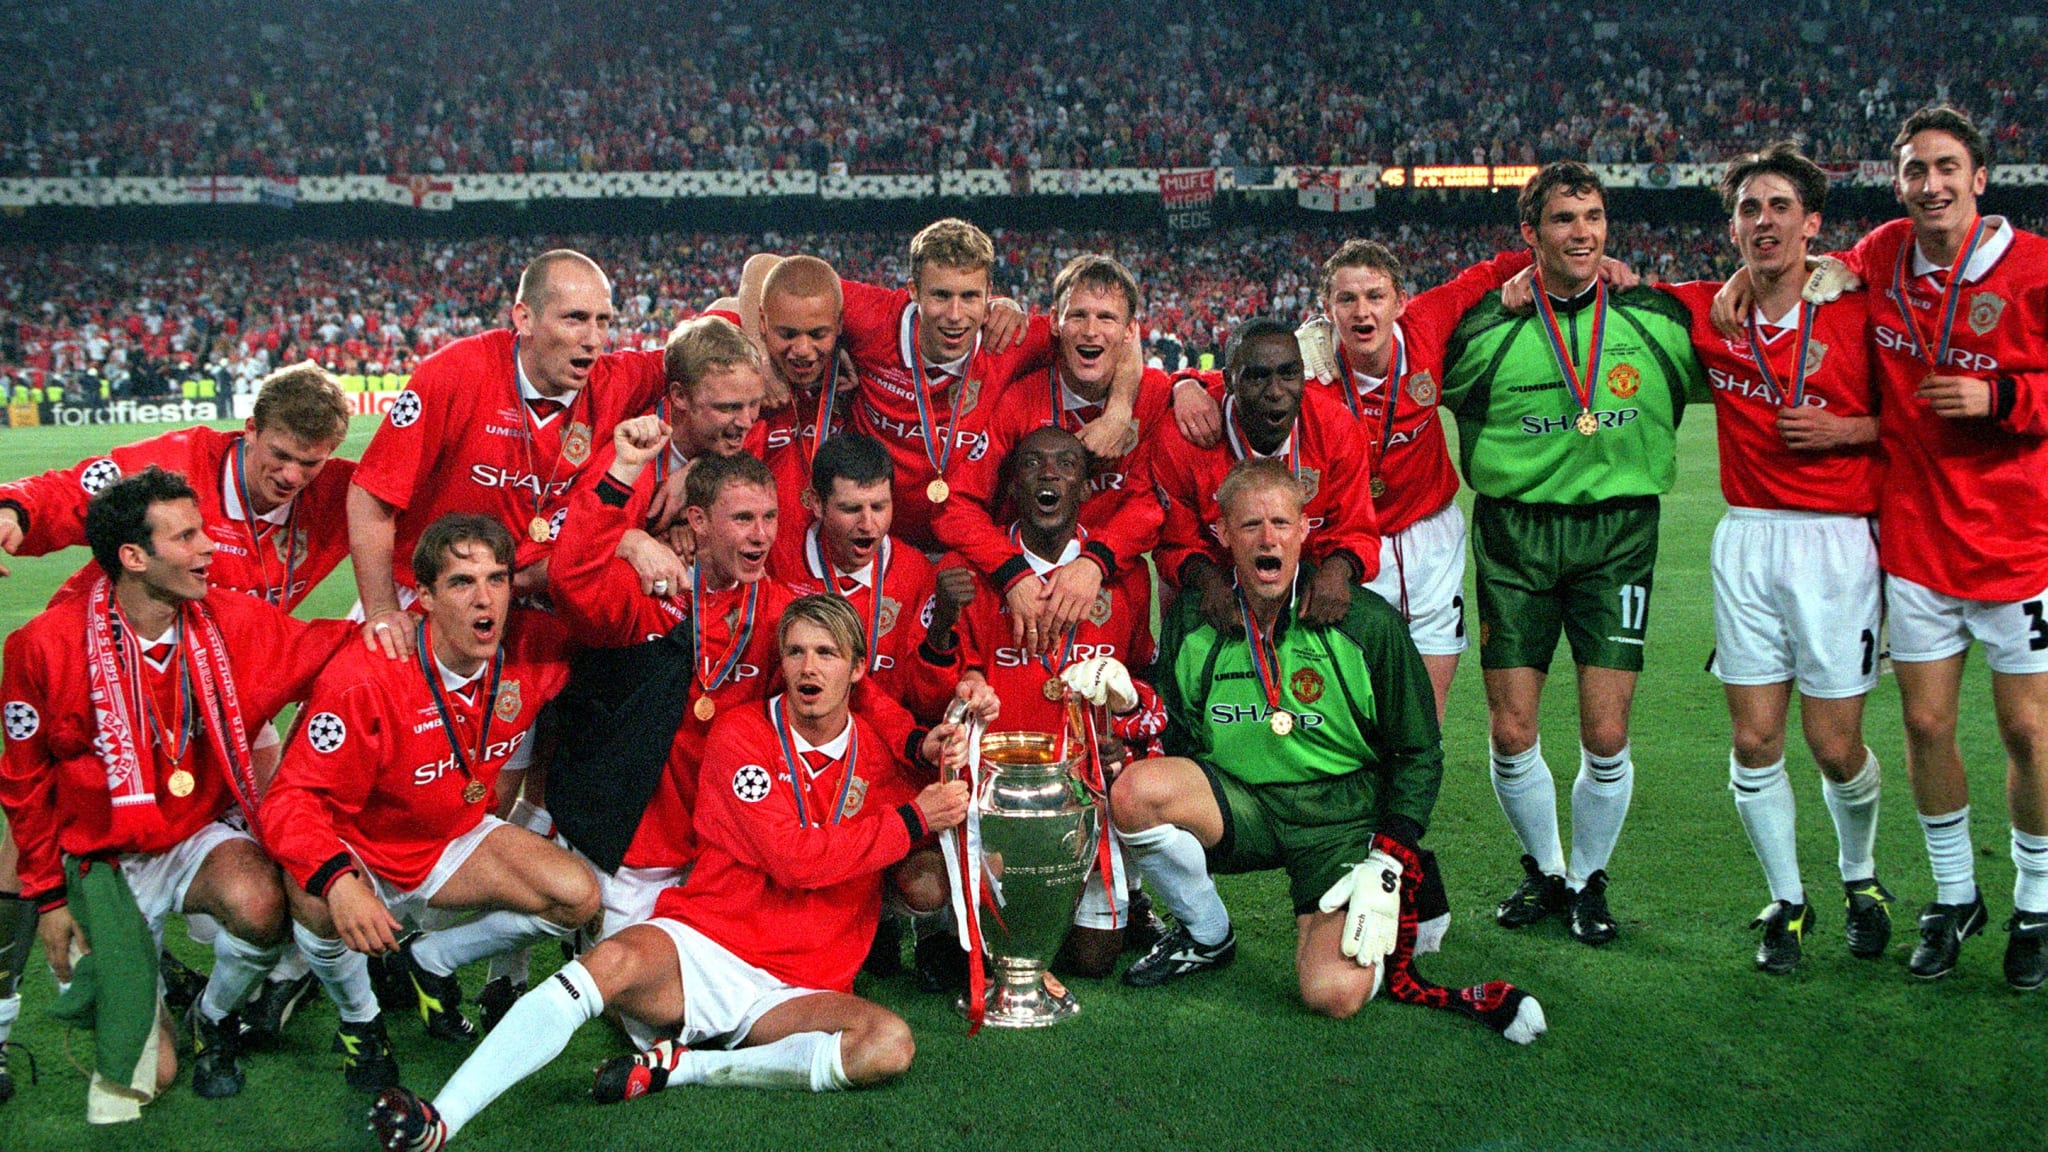 Revisited: Manchester United's Historic 1999 Champions League Win